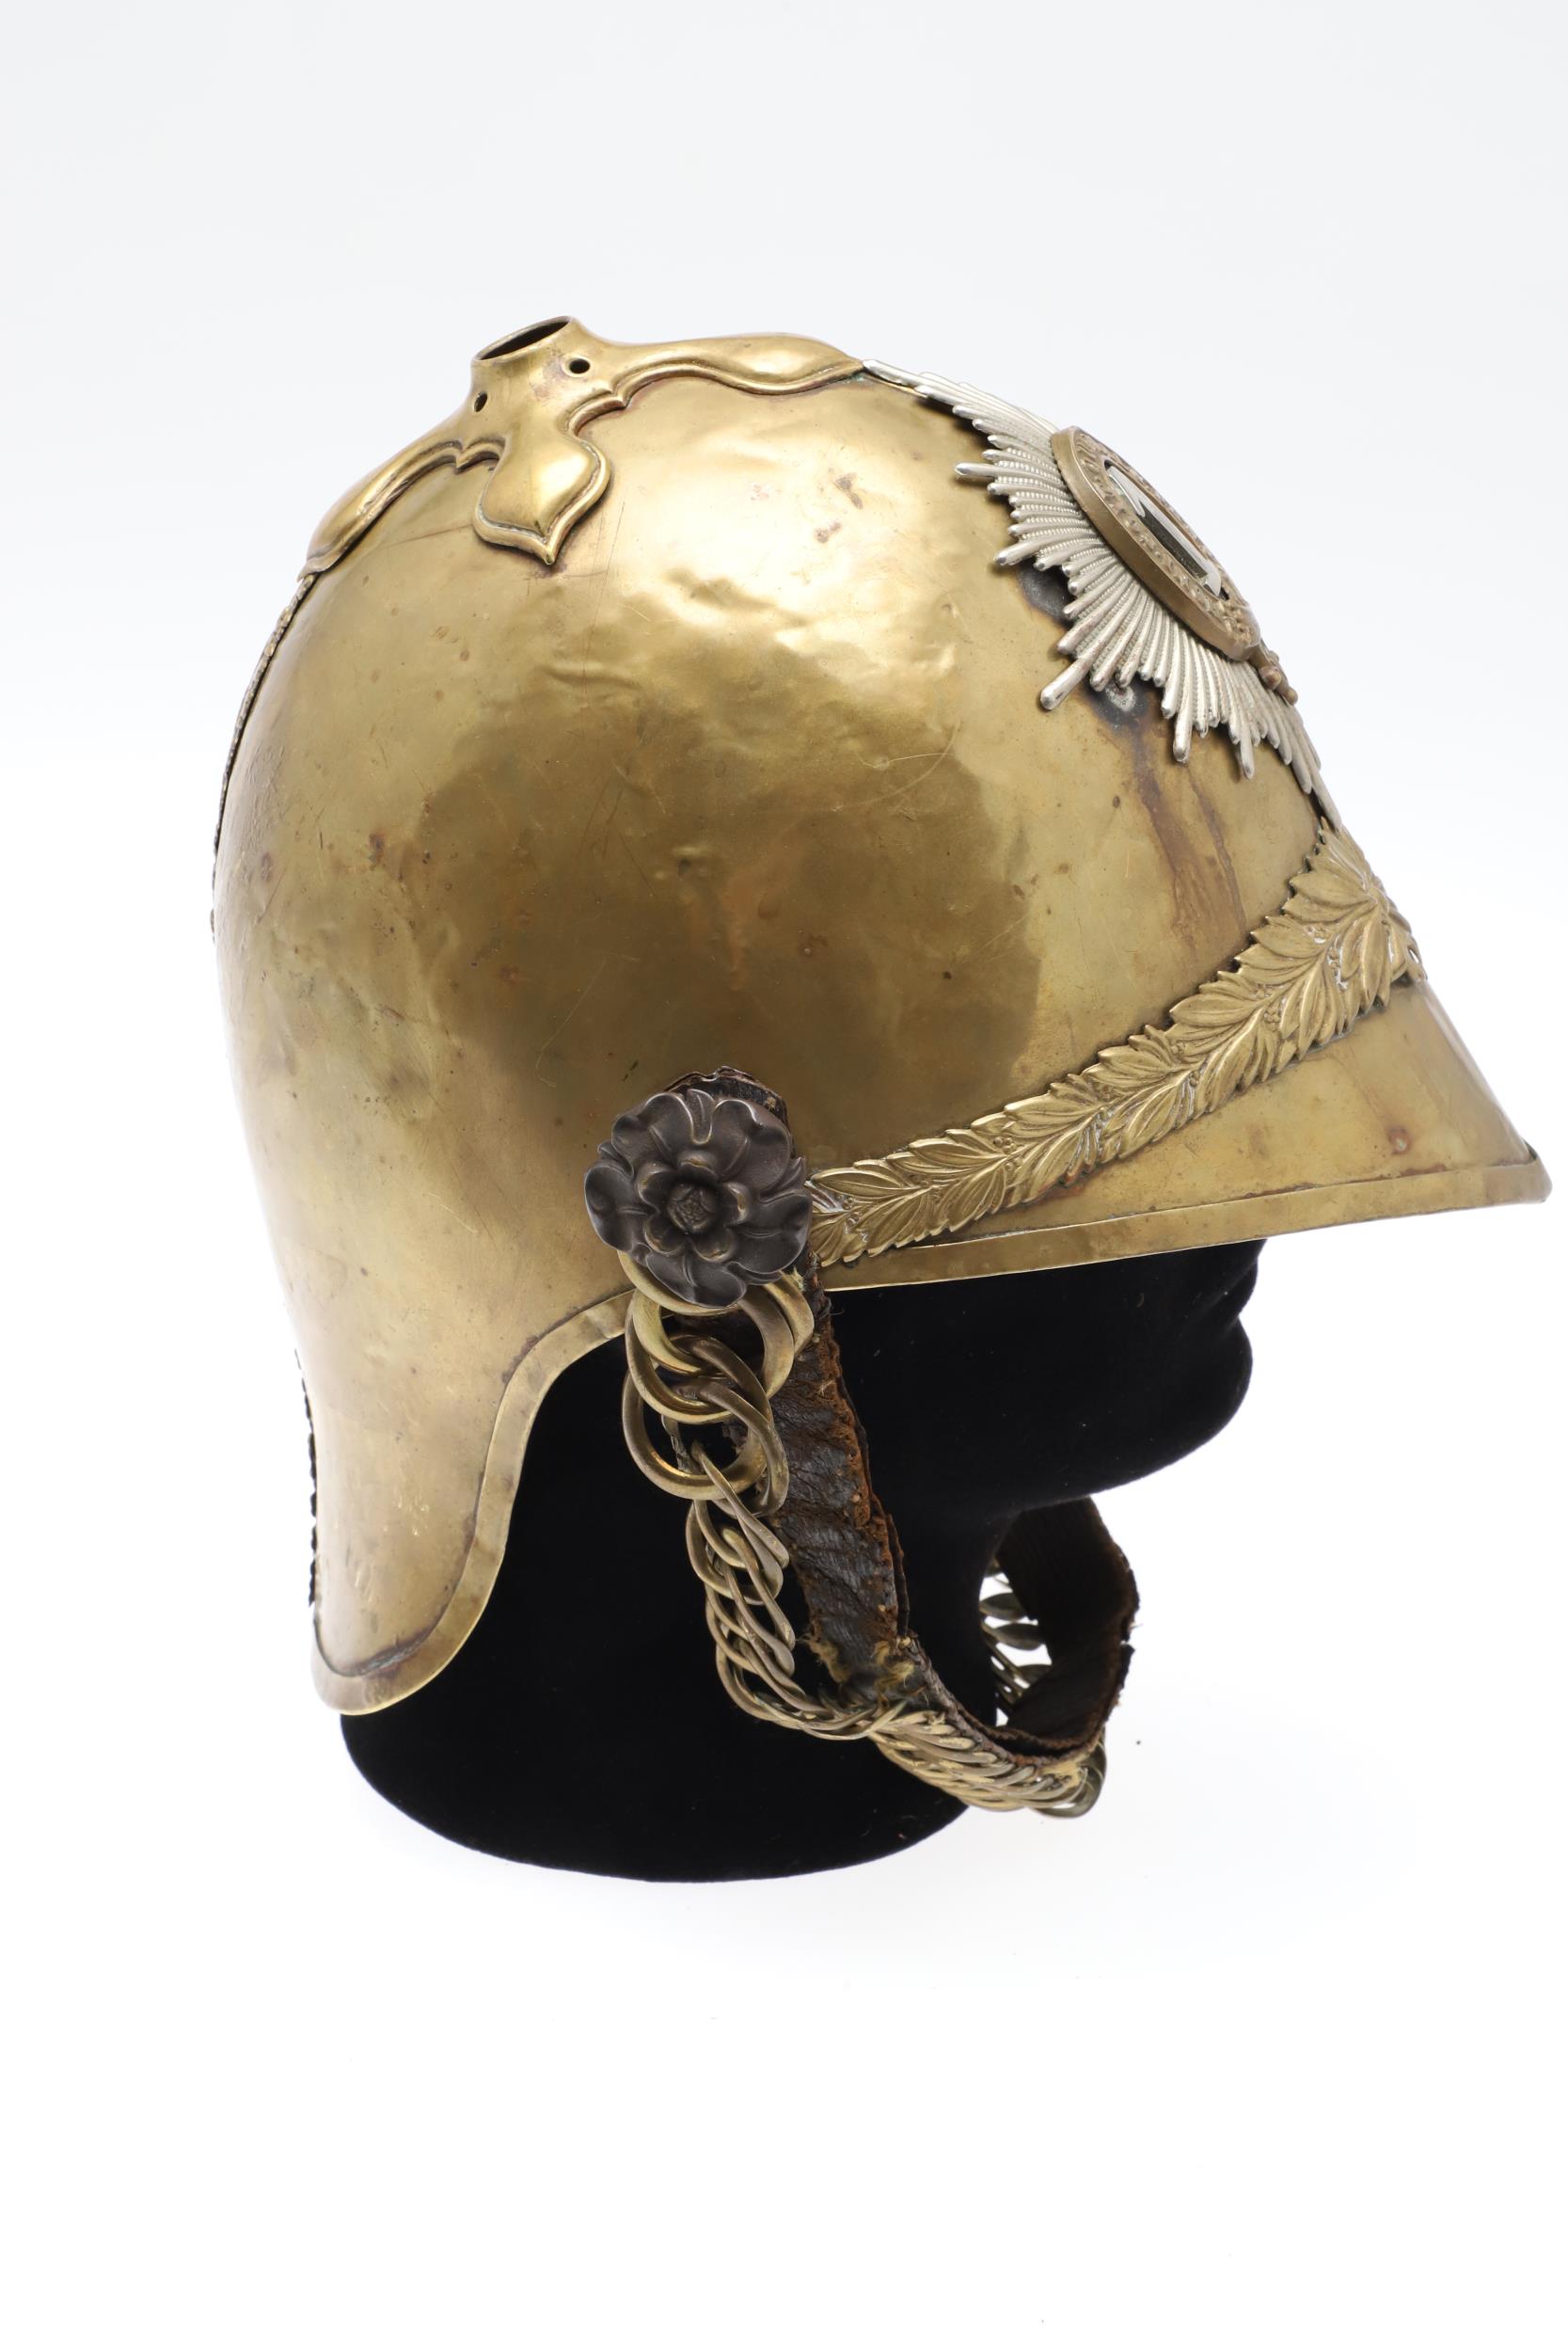 A 1ST DRAGOON GUARDS 1871 PATTERN HELMET. - Image 9 of 15